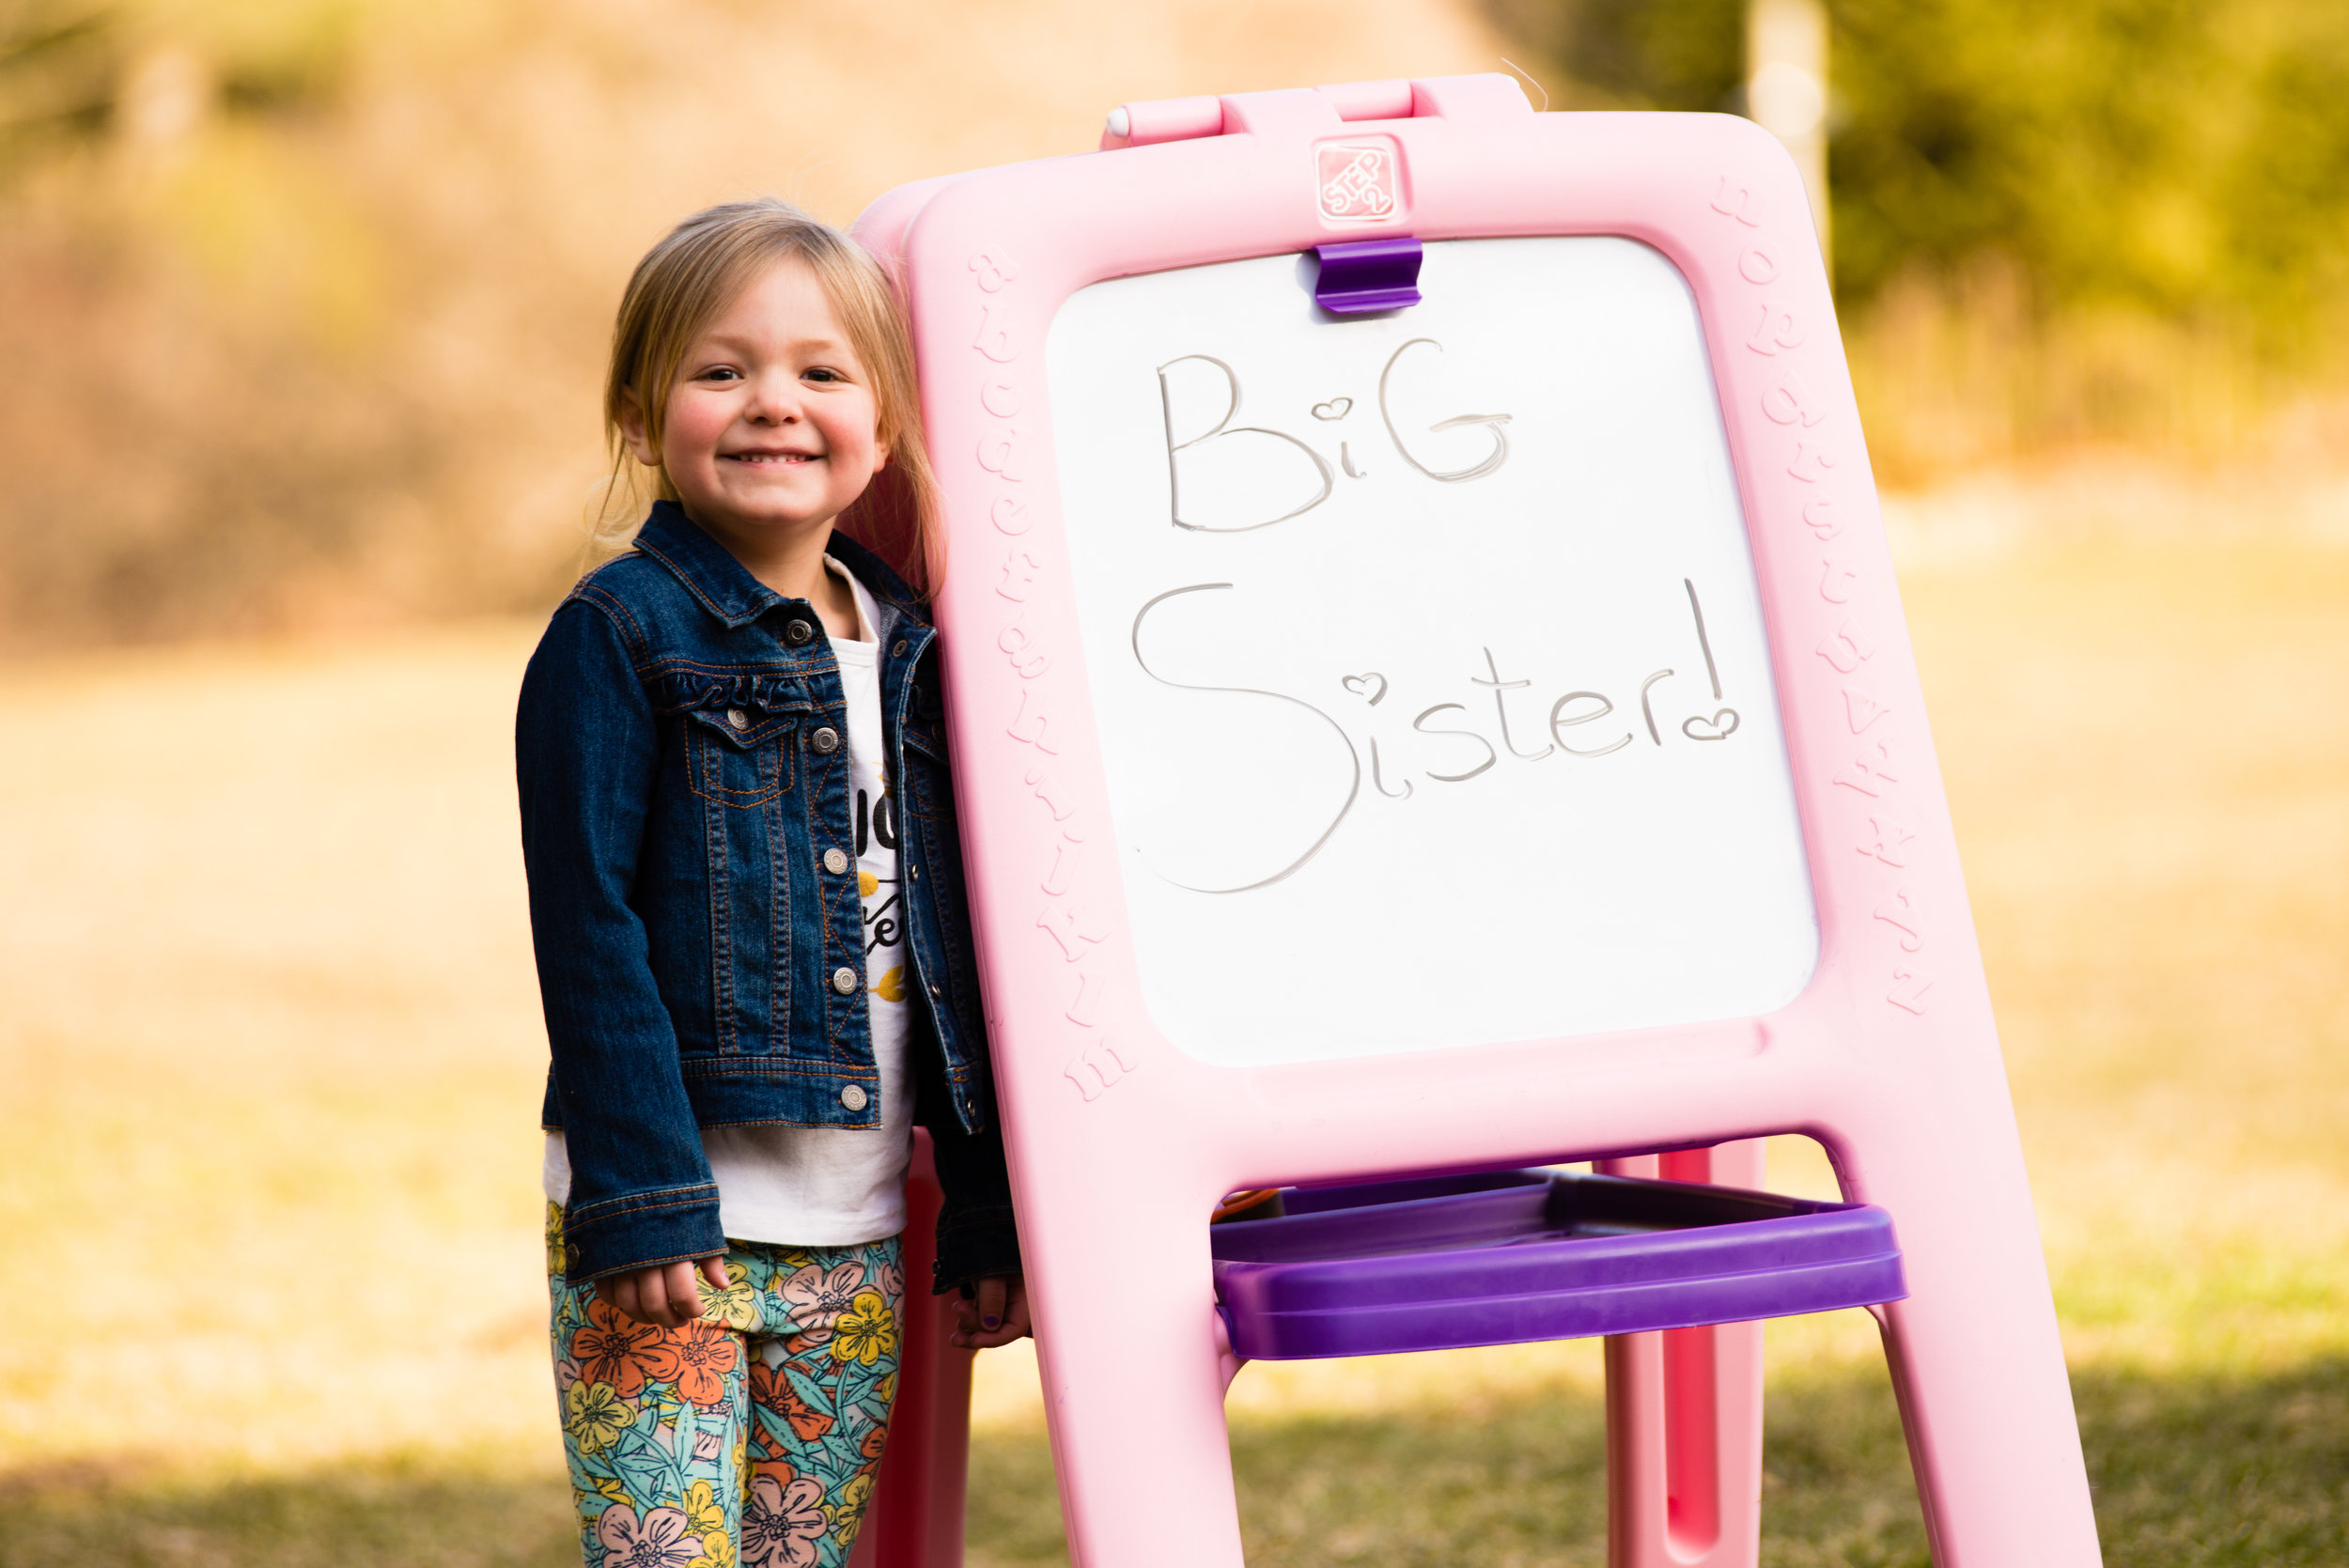 Young Girl Standing Next To "Big Sister" Sign